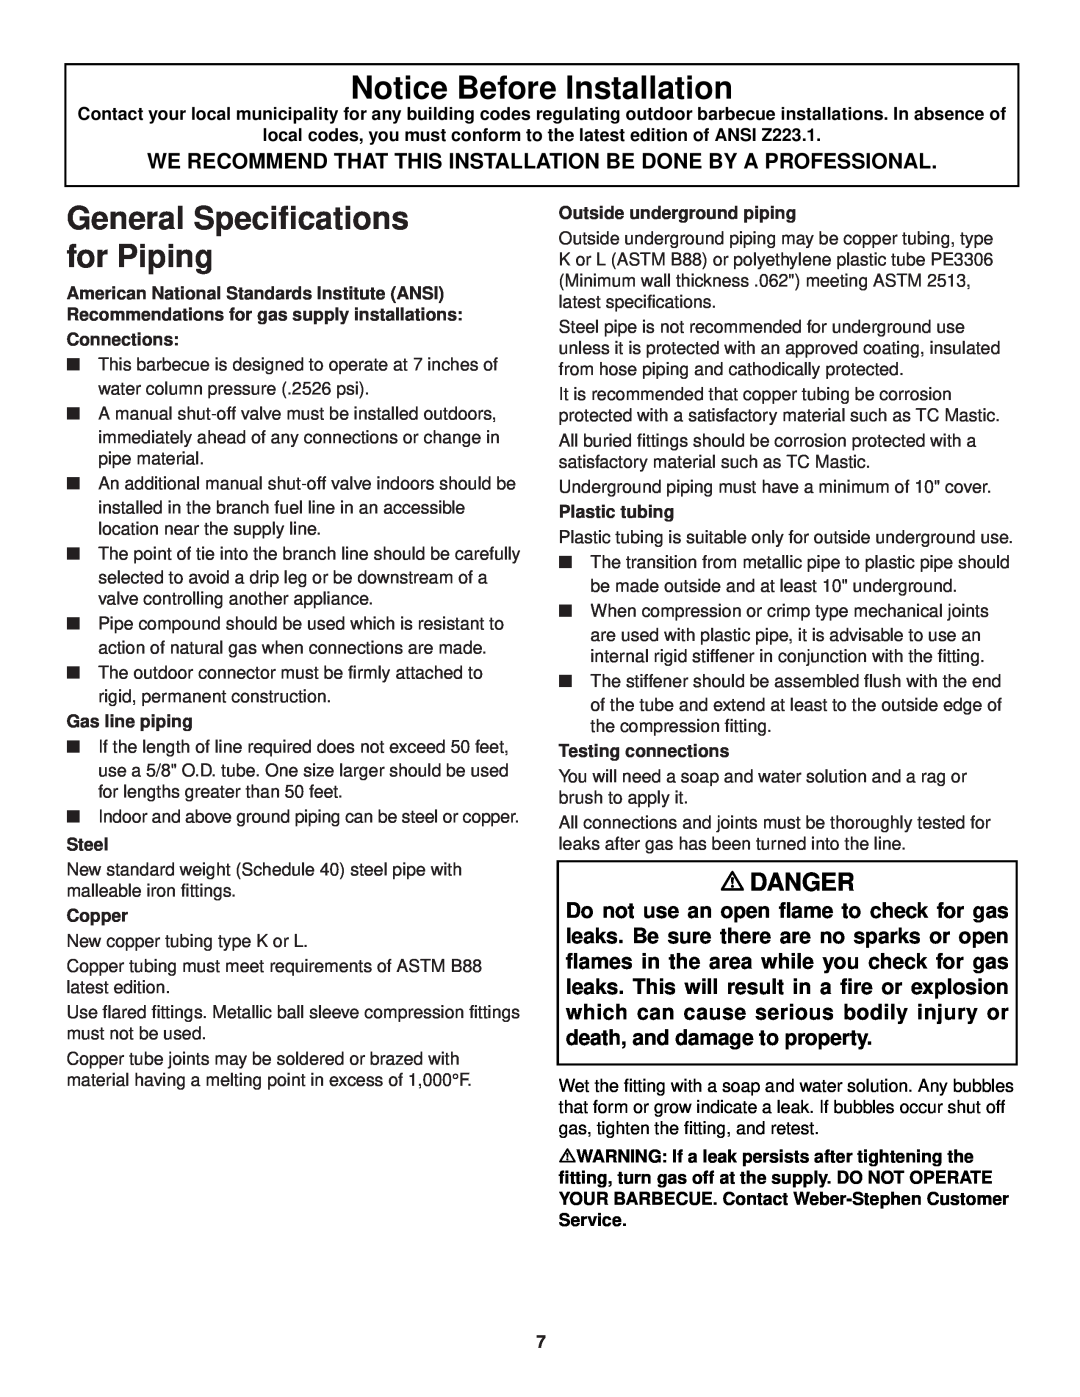 Weber 3500 owner manual Notice Before Installation, General Specifications for Piping, mDANGER 